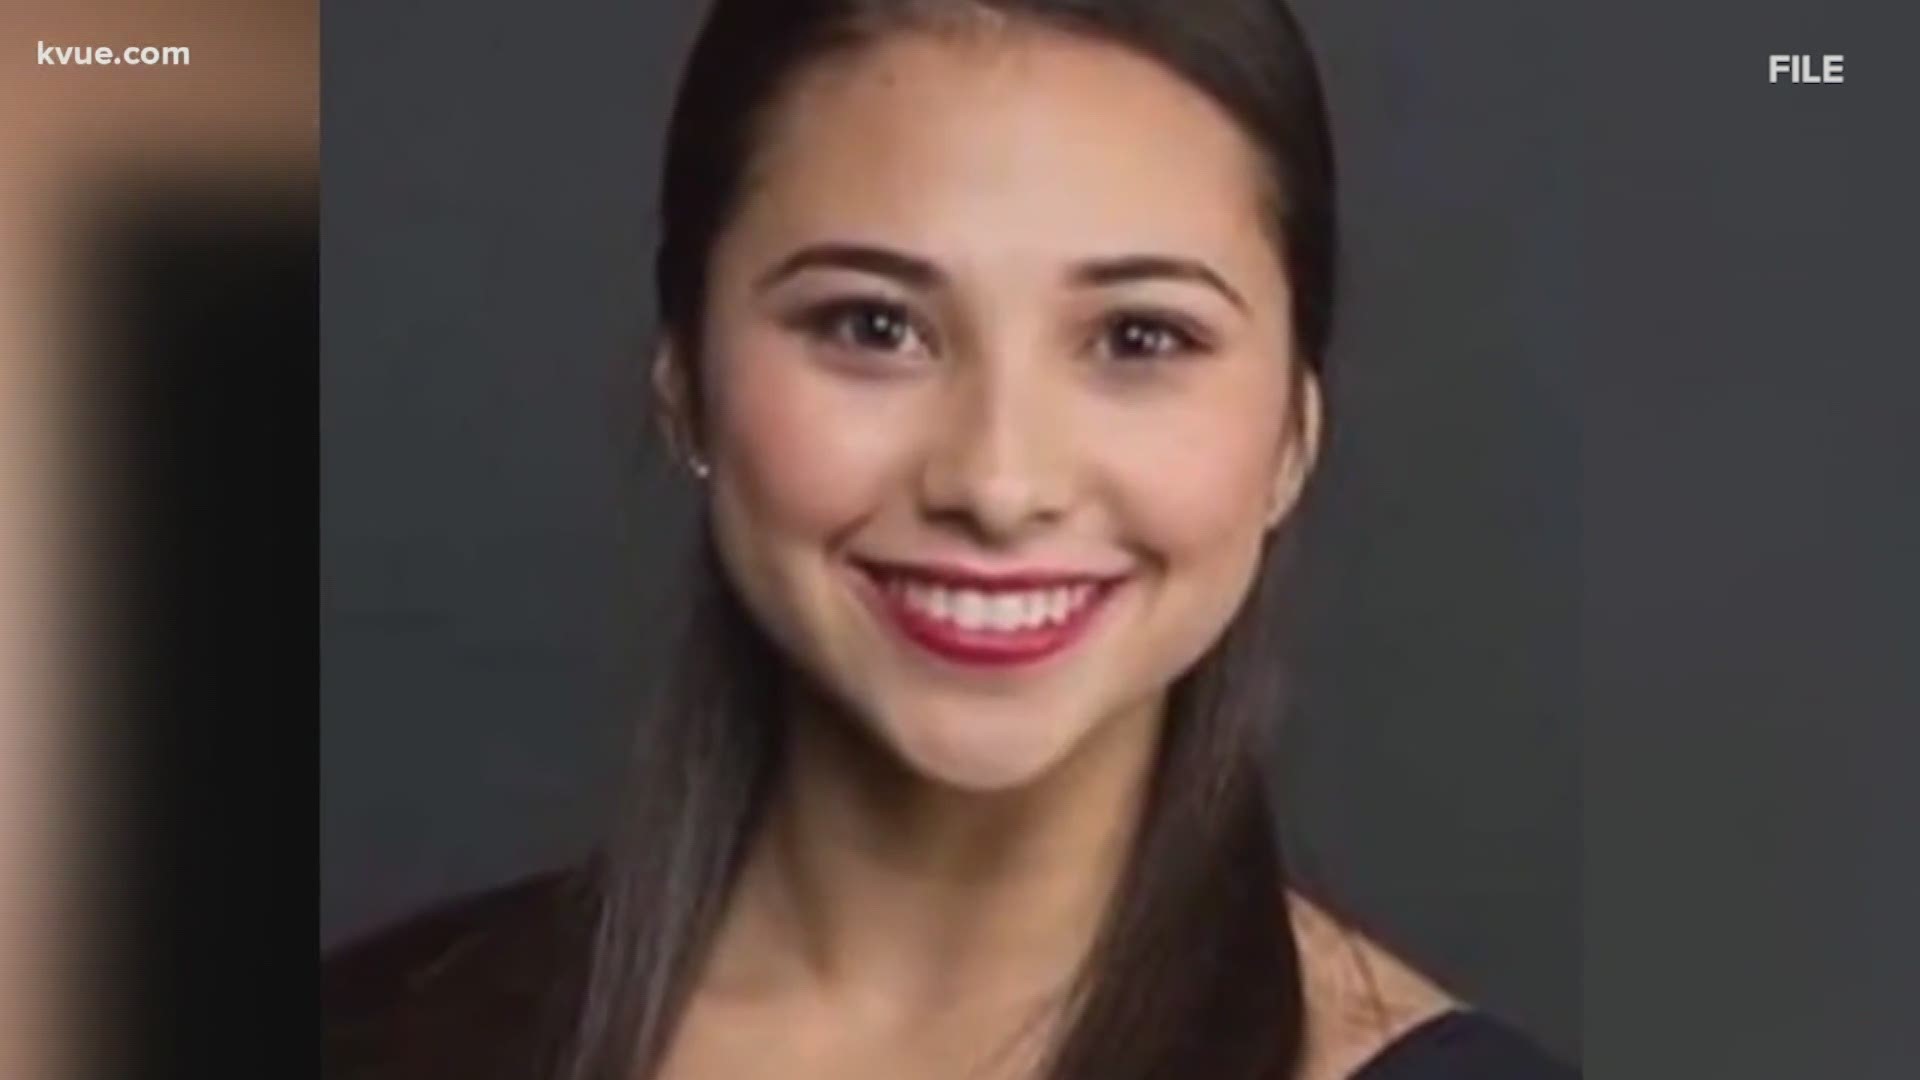 Five years ago, University of Texas police found the body of first-year student Haruka Weiser on campus.